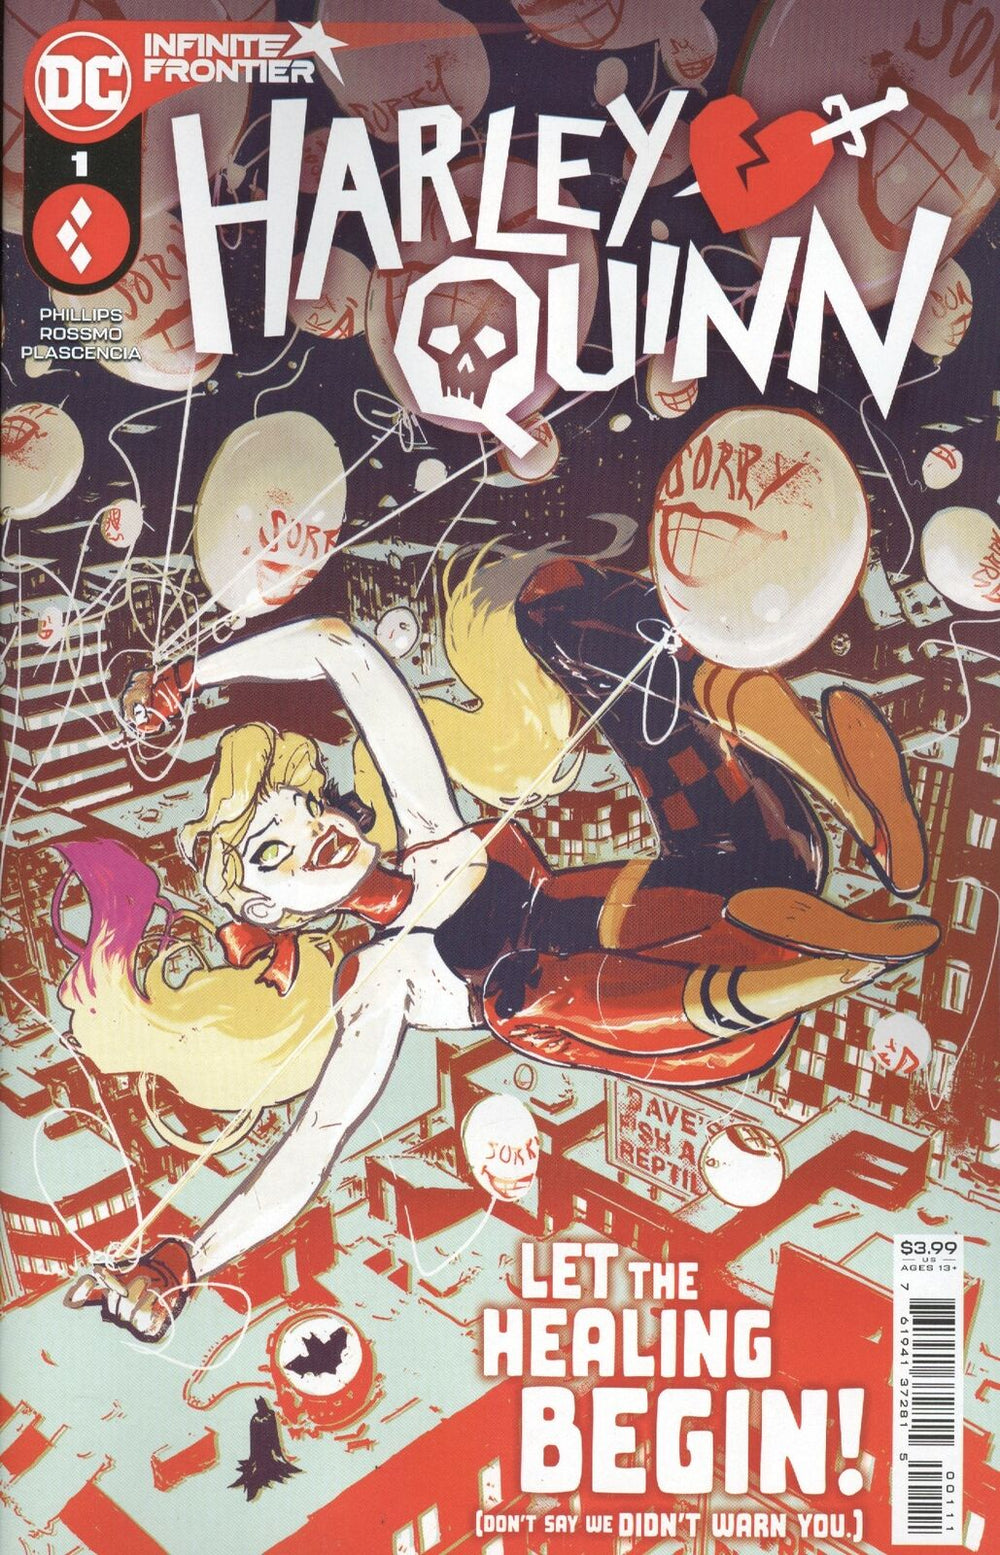 HARLEY QUINN #1 COVER A RILEY ROSSMO